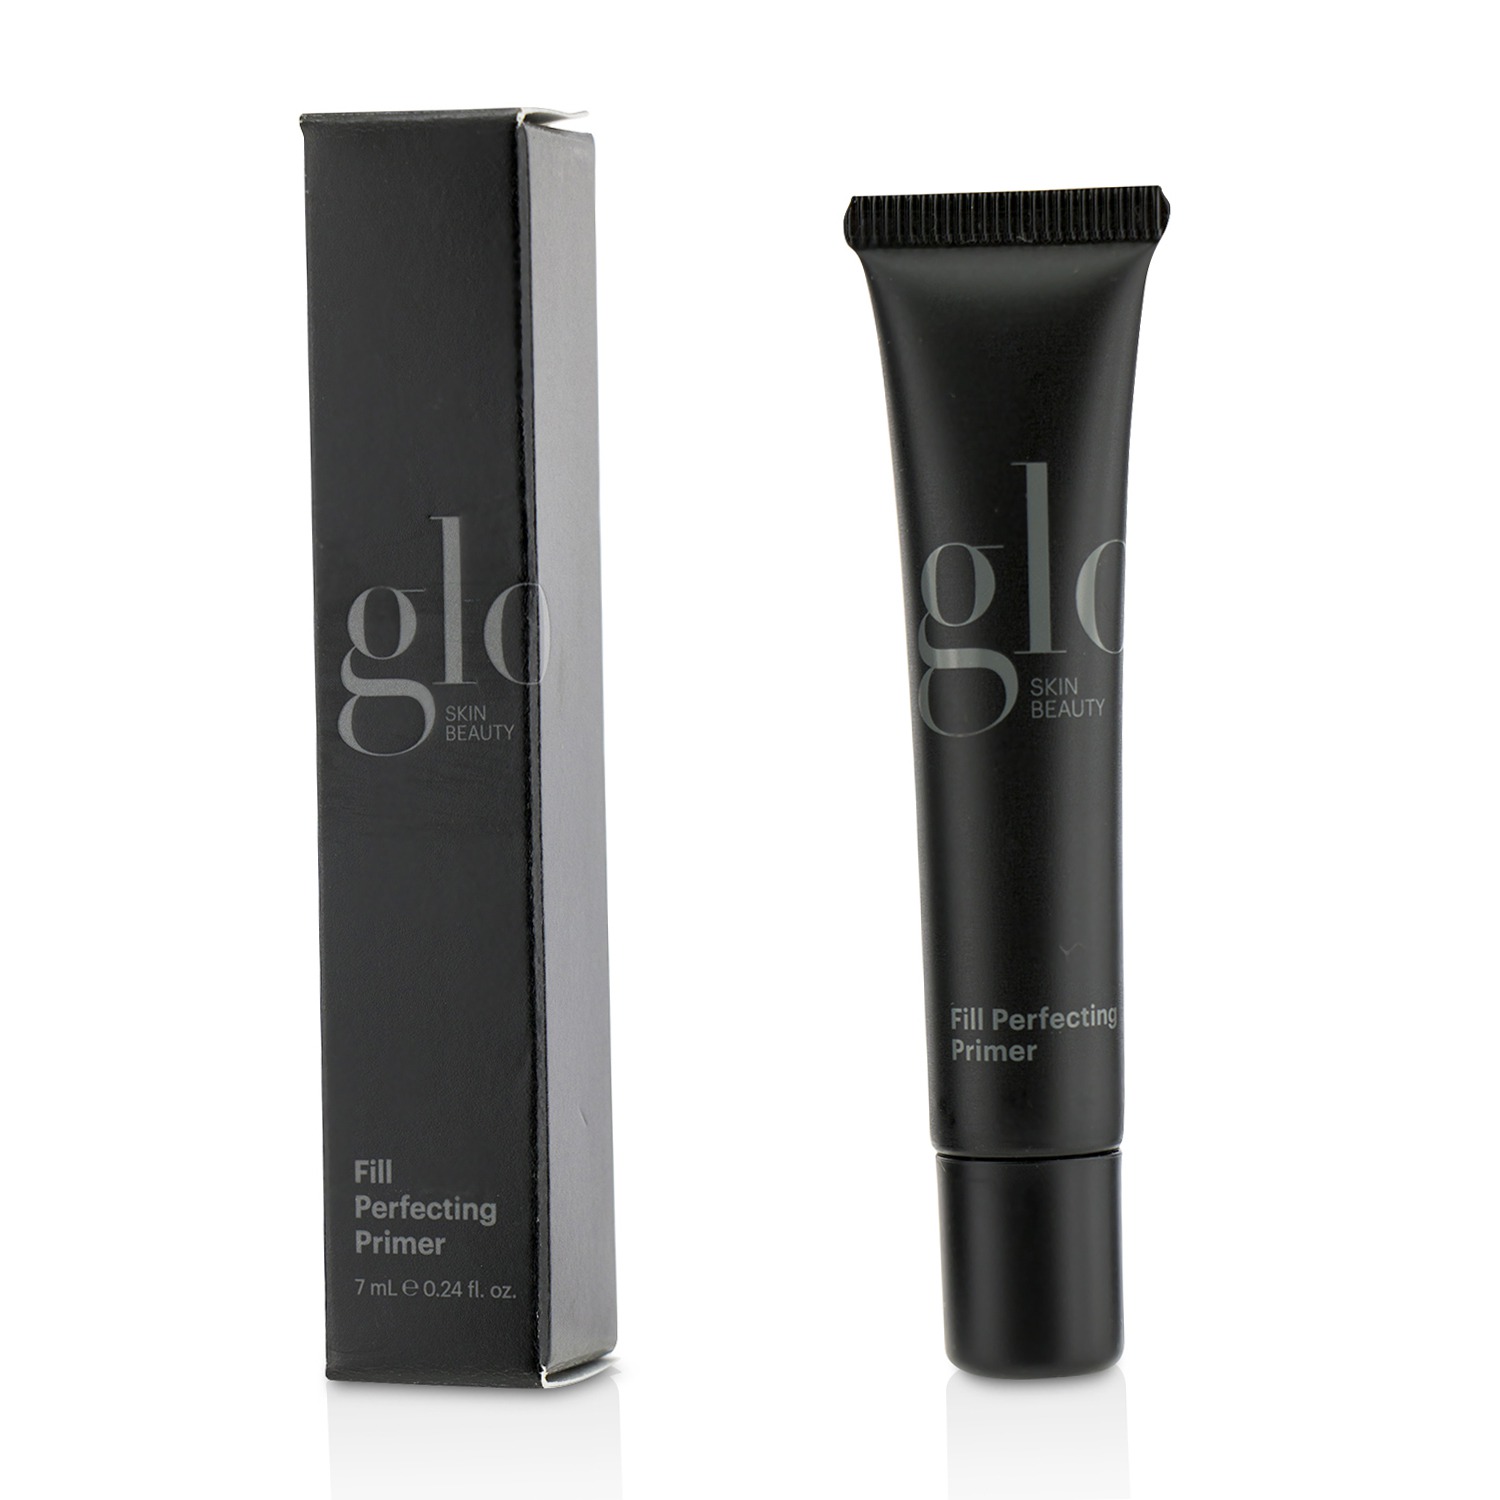 Fill Perfecting Primer Glo Skin Beauty Image